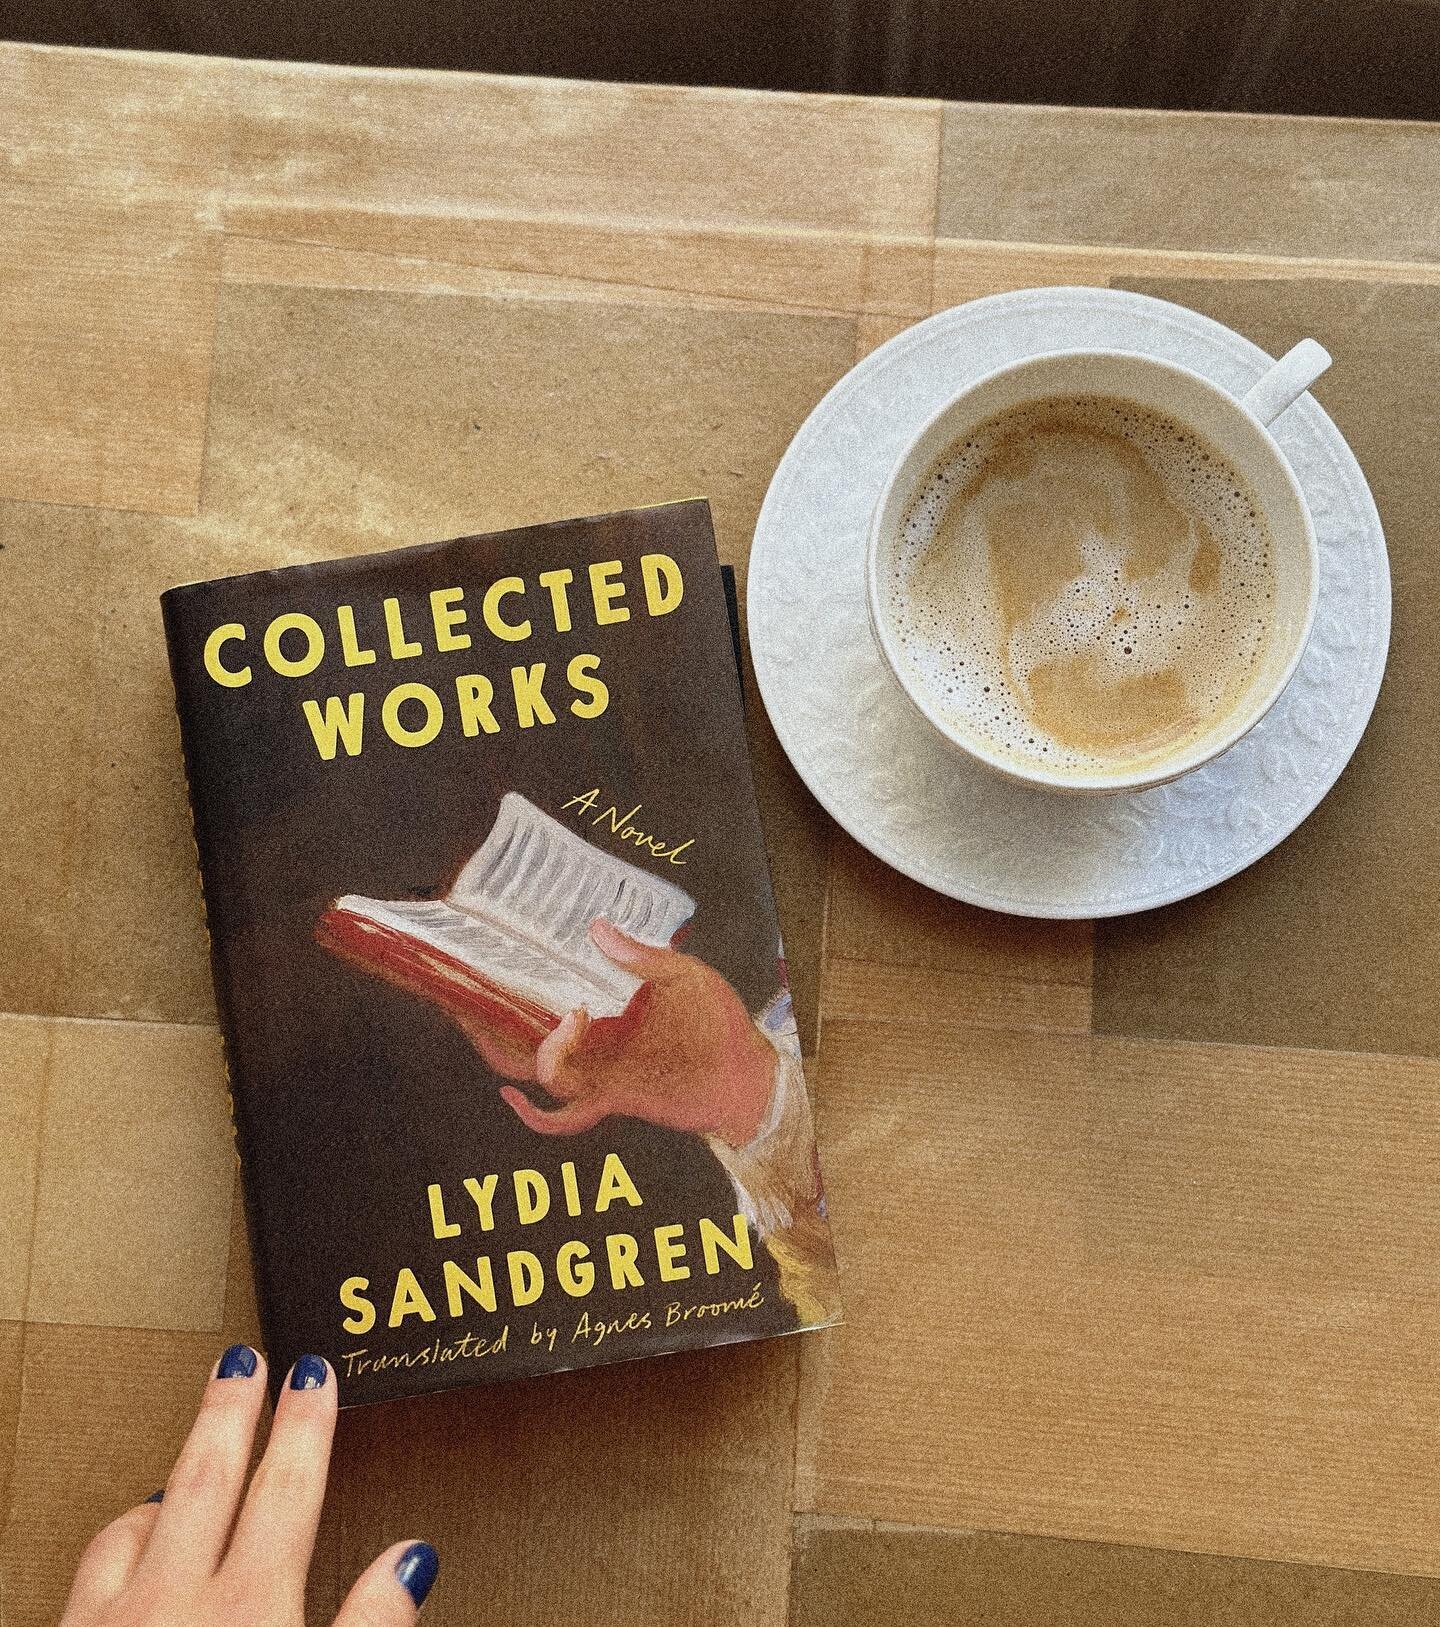 I fear no amount of words can do this novel the justice it deserves. I was floored from the first page to the last and whizzed through all almost 700 pages, pining for more. Lydia Sandgreen spent ten years of her life writing this debut novel and it 